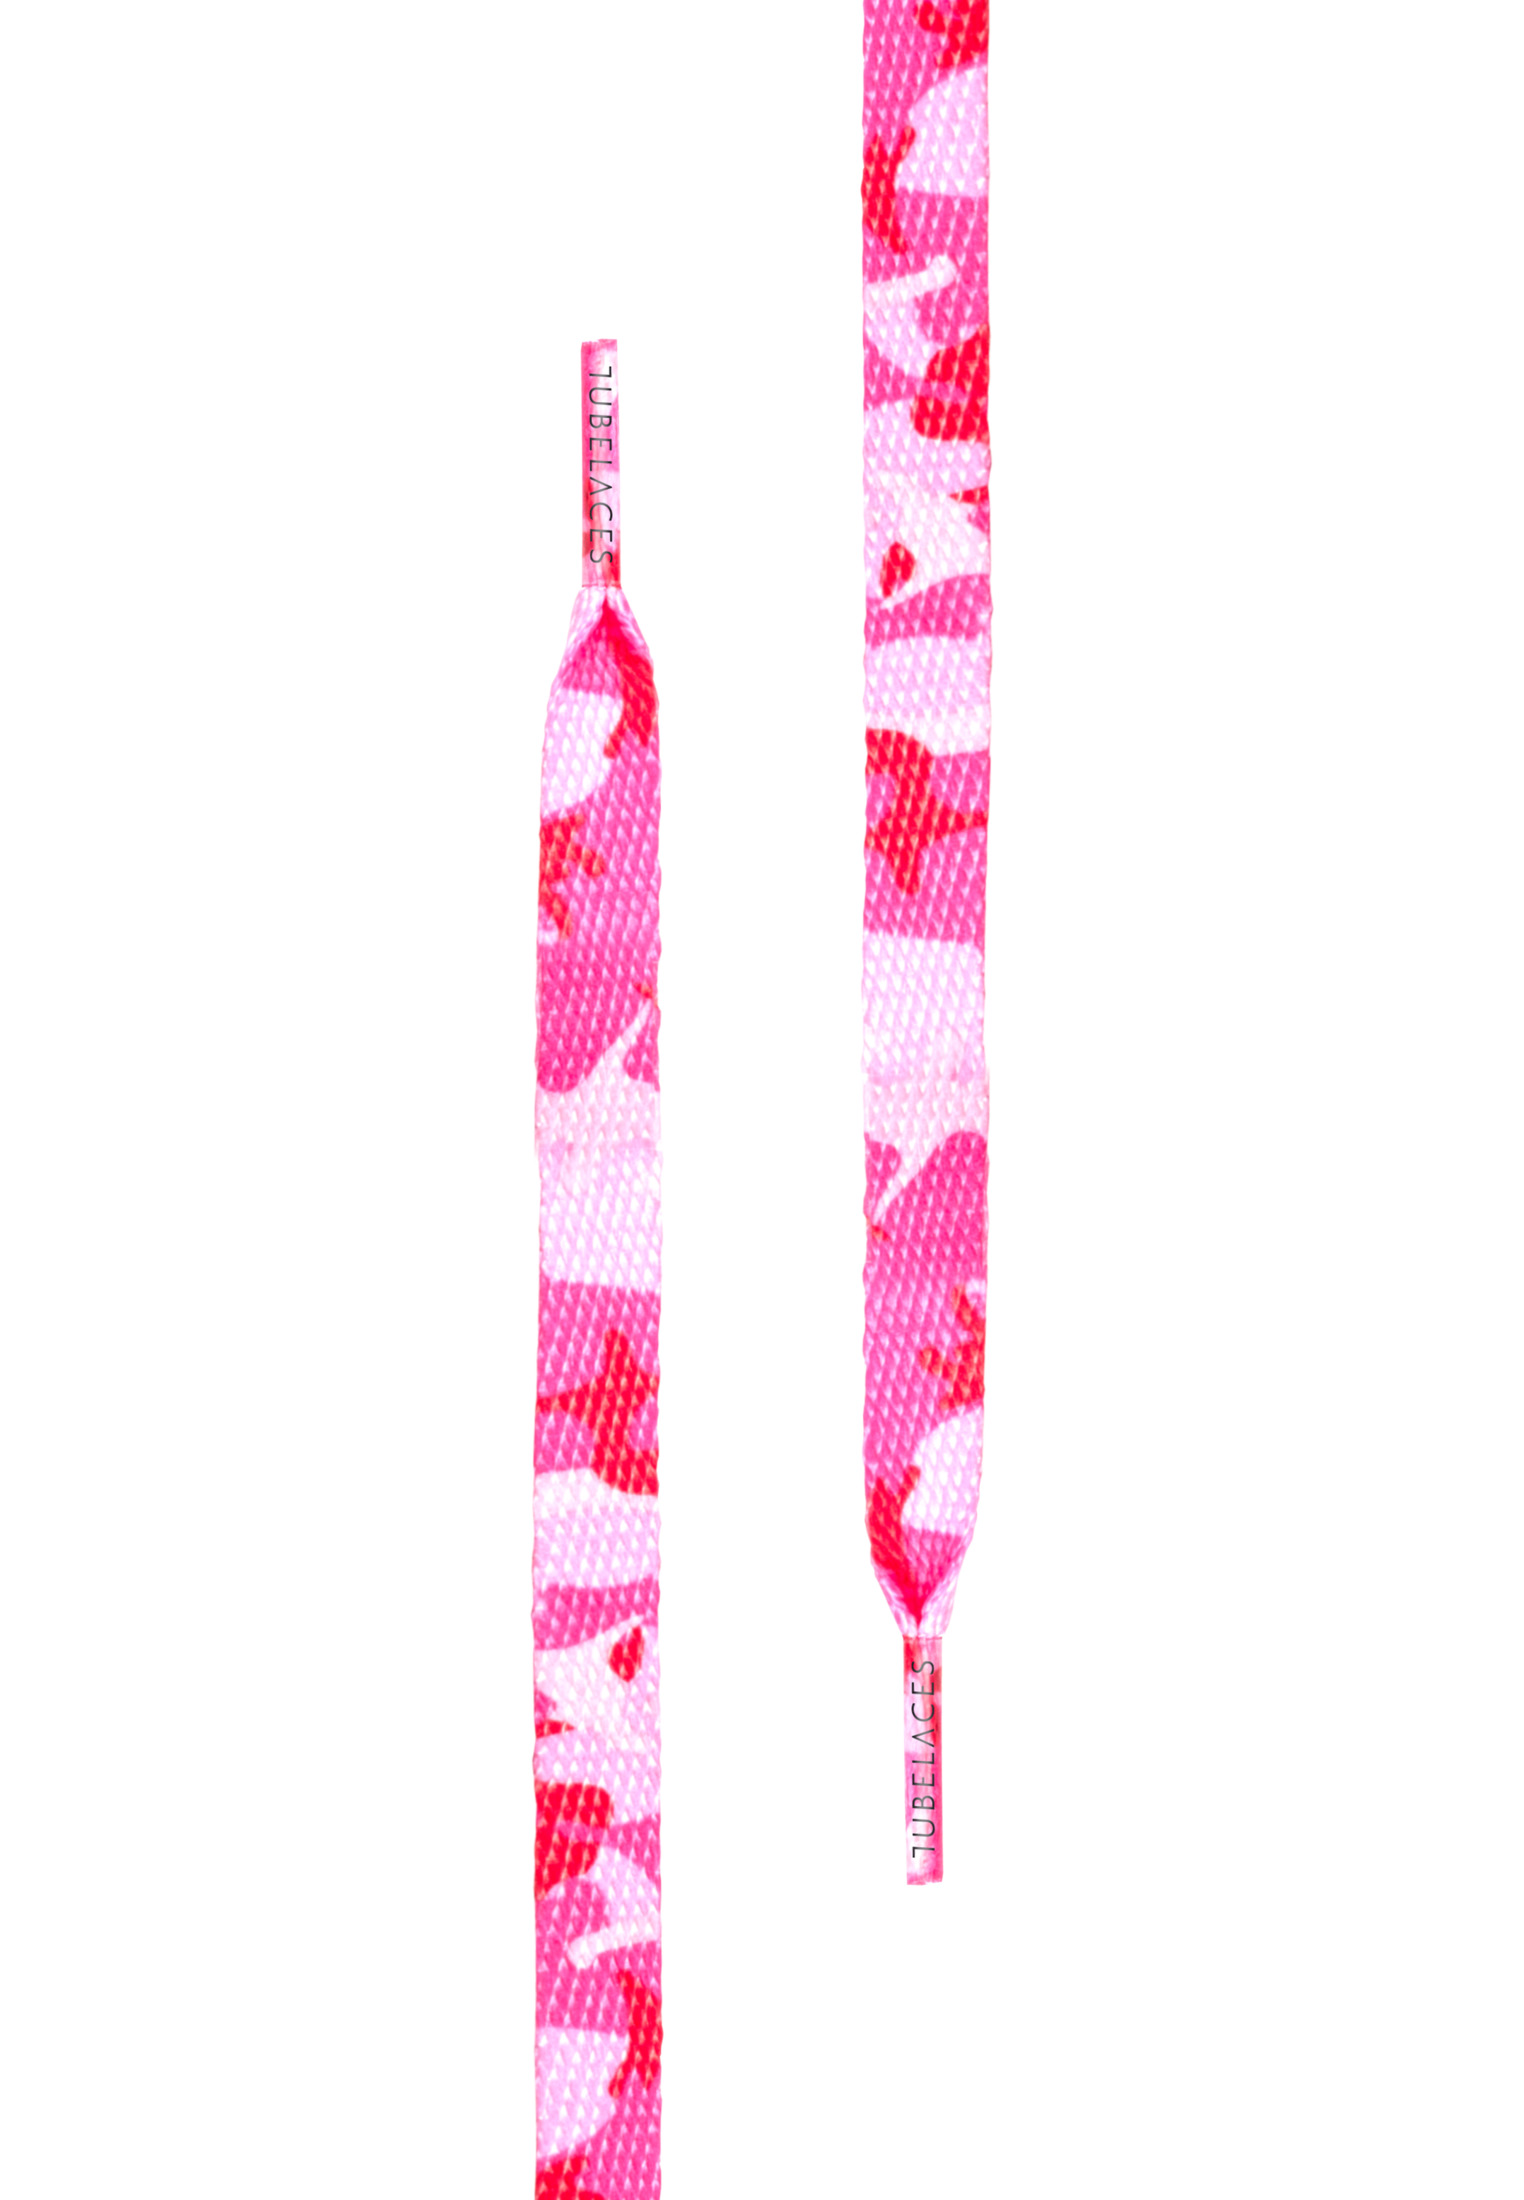 Laces Tubelaces Special Flat in Farbe pink camo